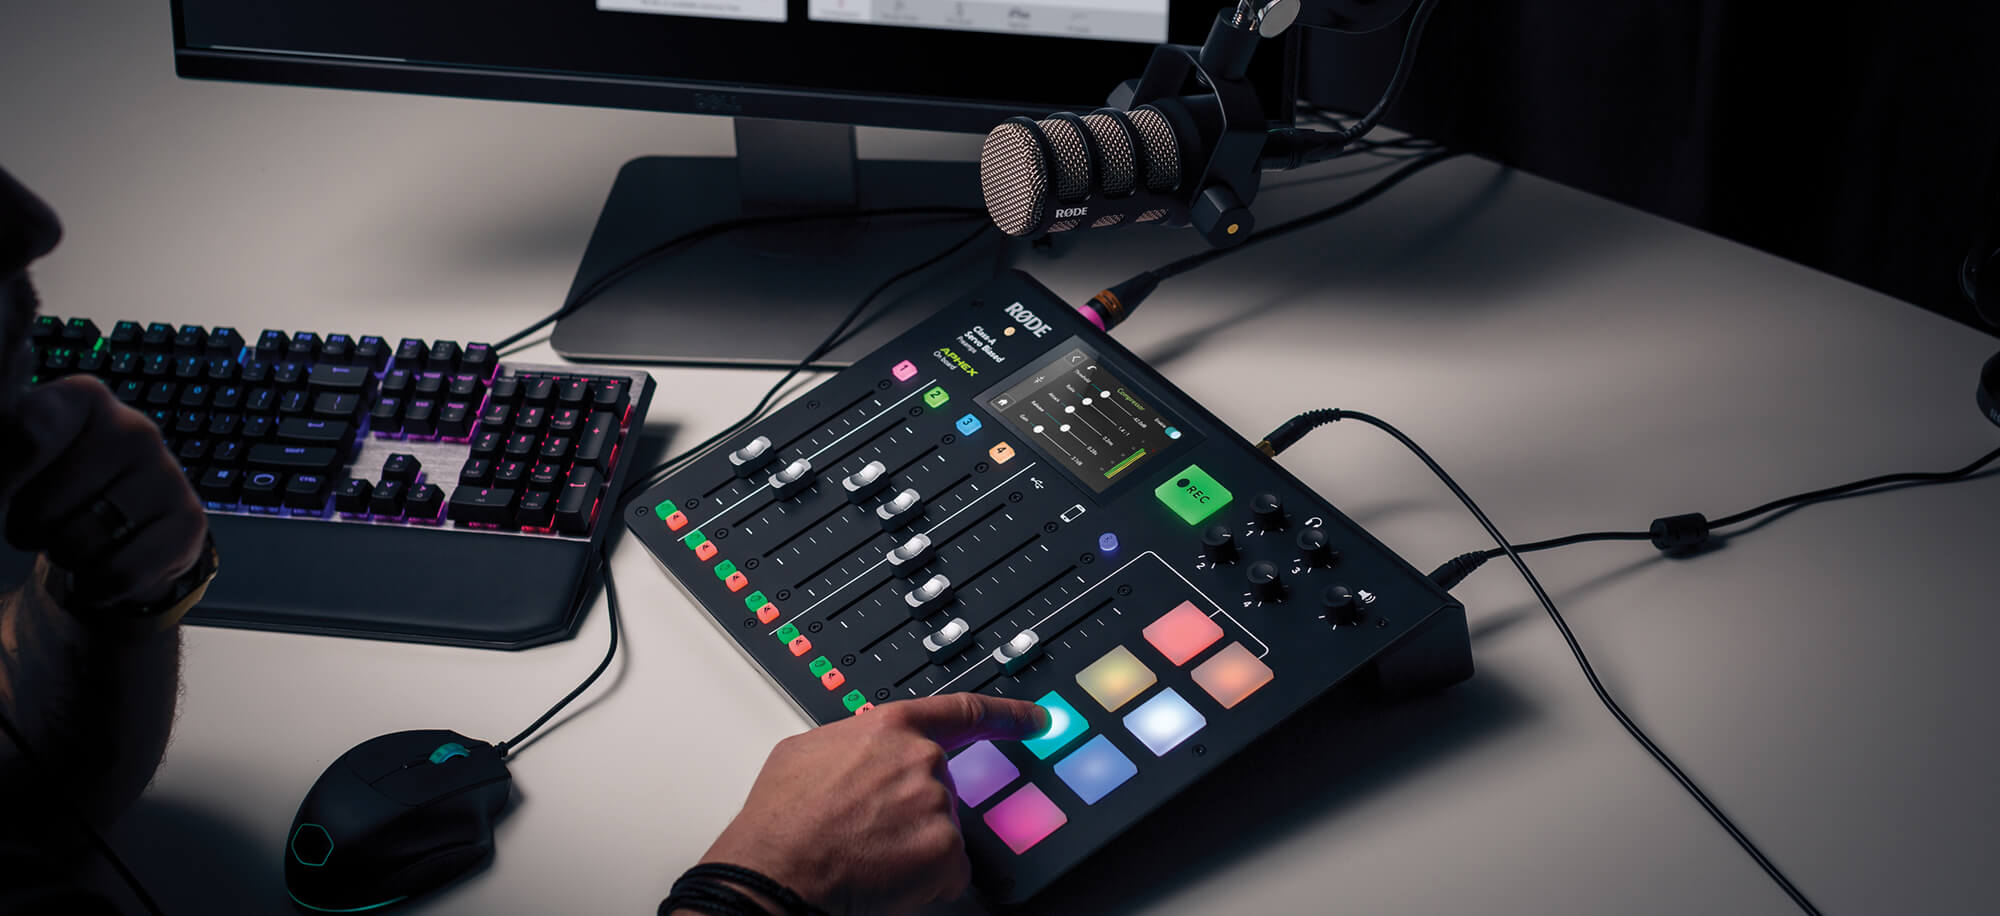 PodMic connected to RØDECaster Pro with finger pressing sound pad